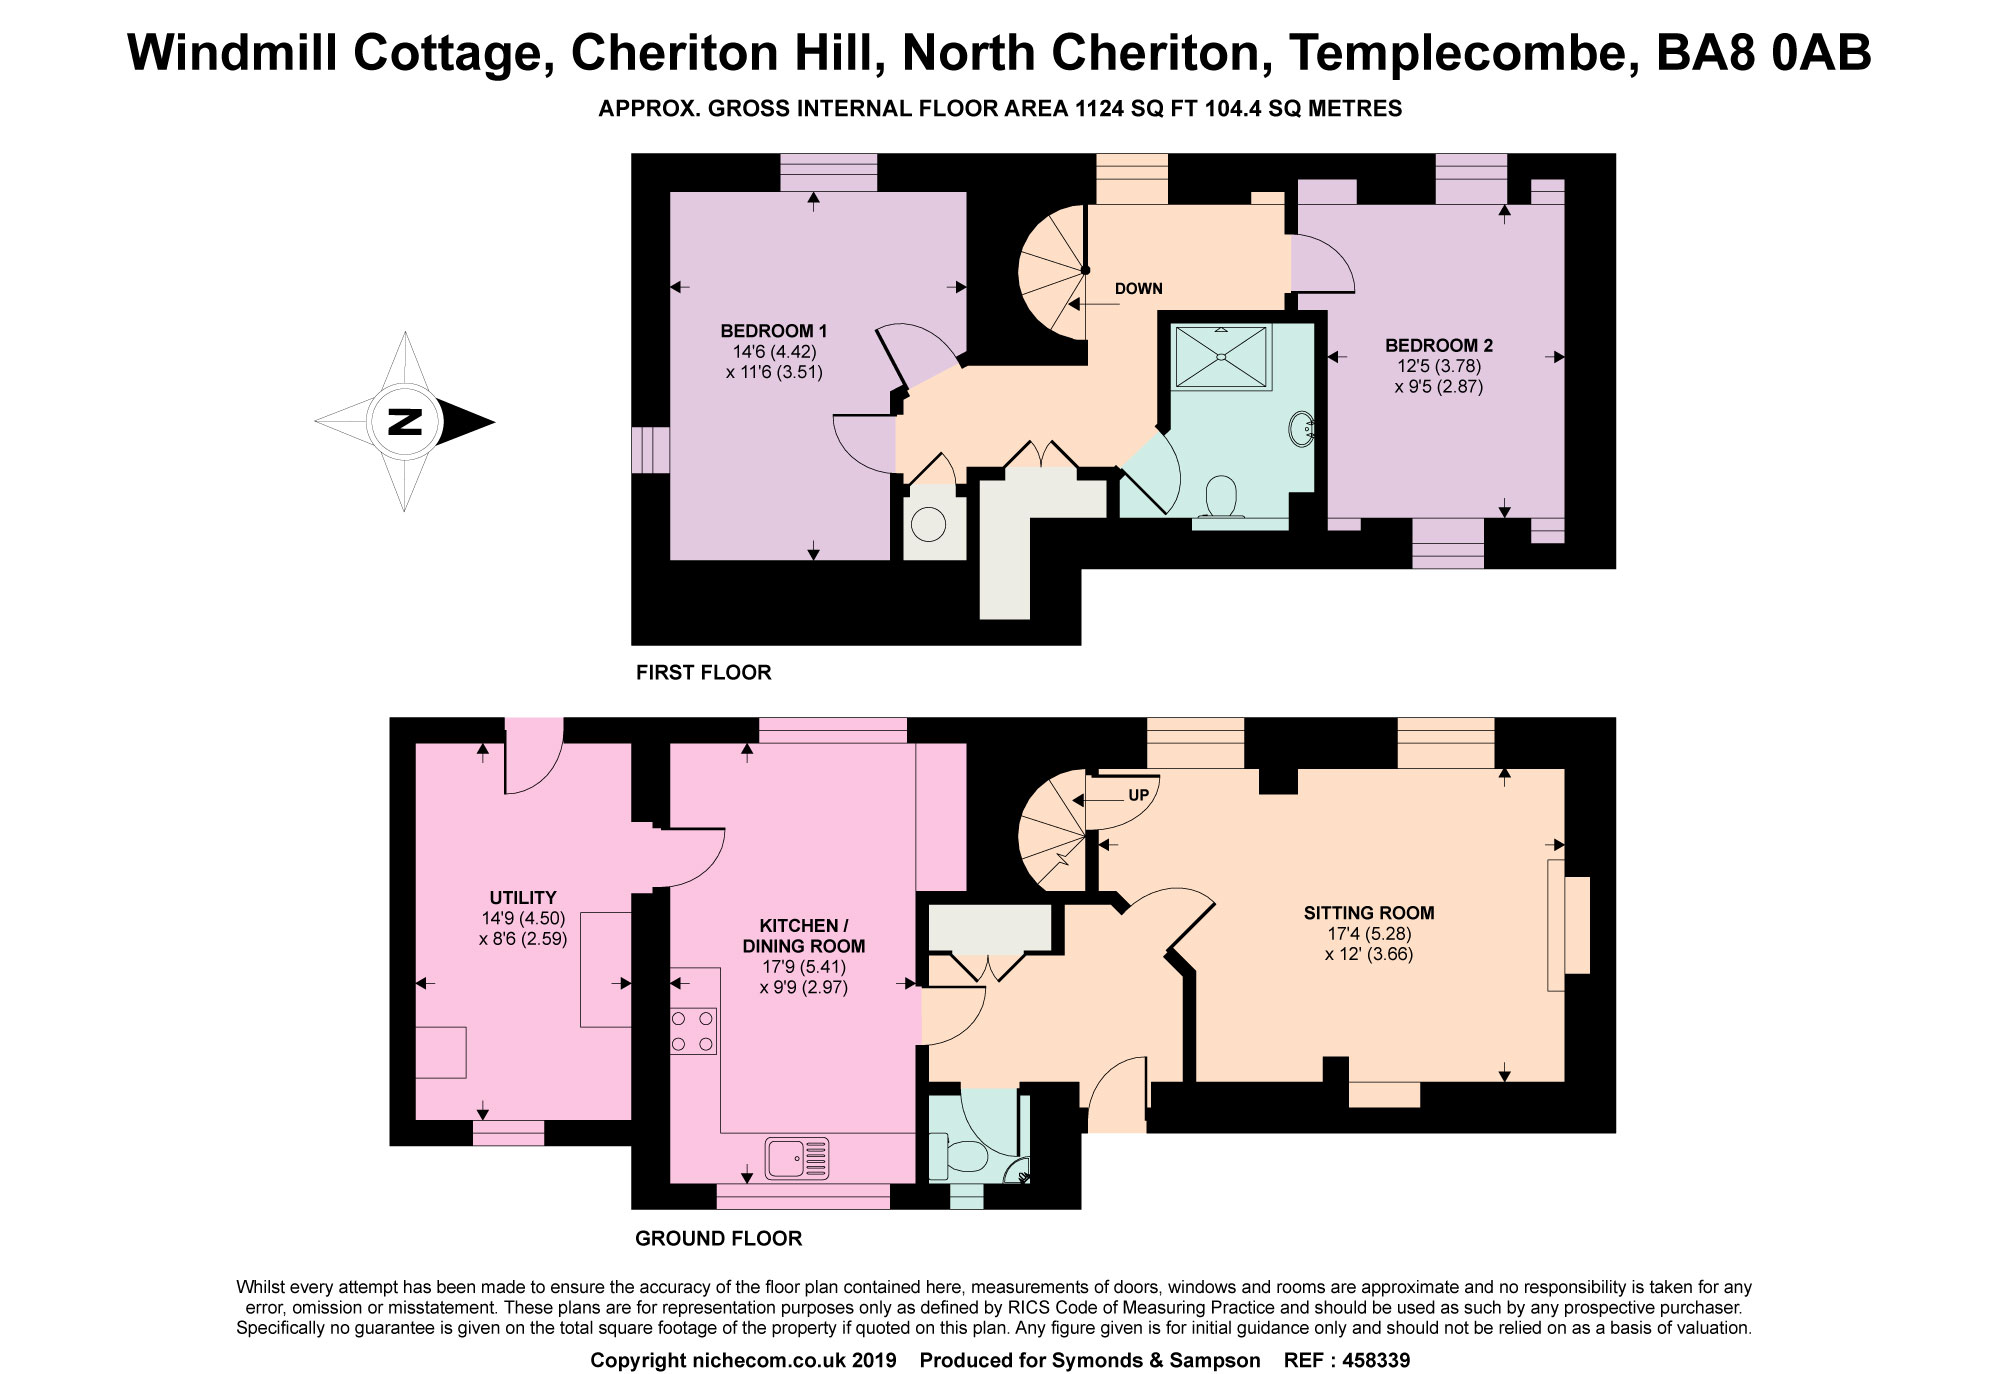 2 Bedrooms Detached house for sale in Cheriton Hill, North Cheriton, Templecombe, Somerset BA8